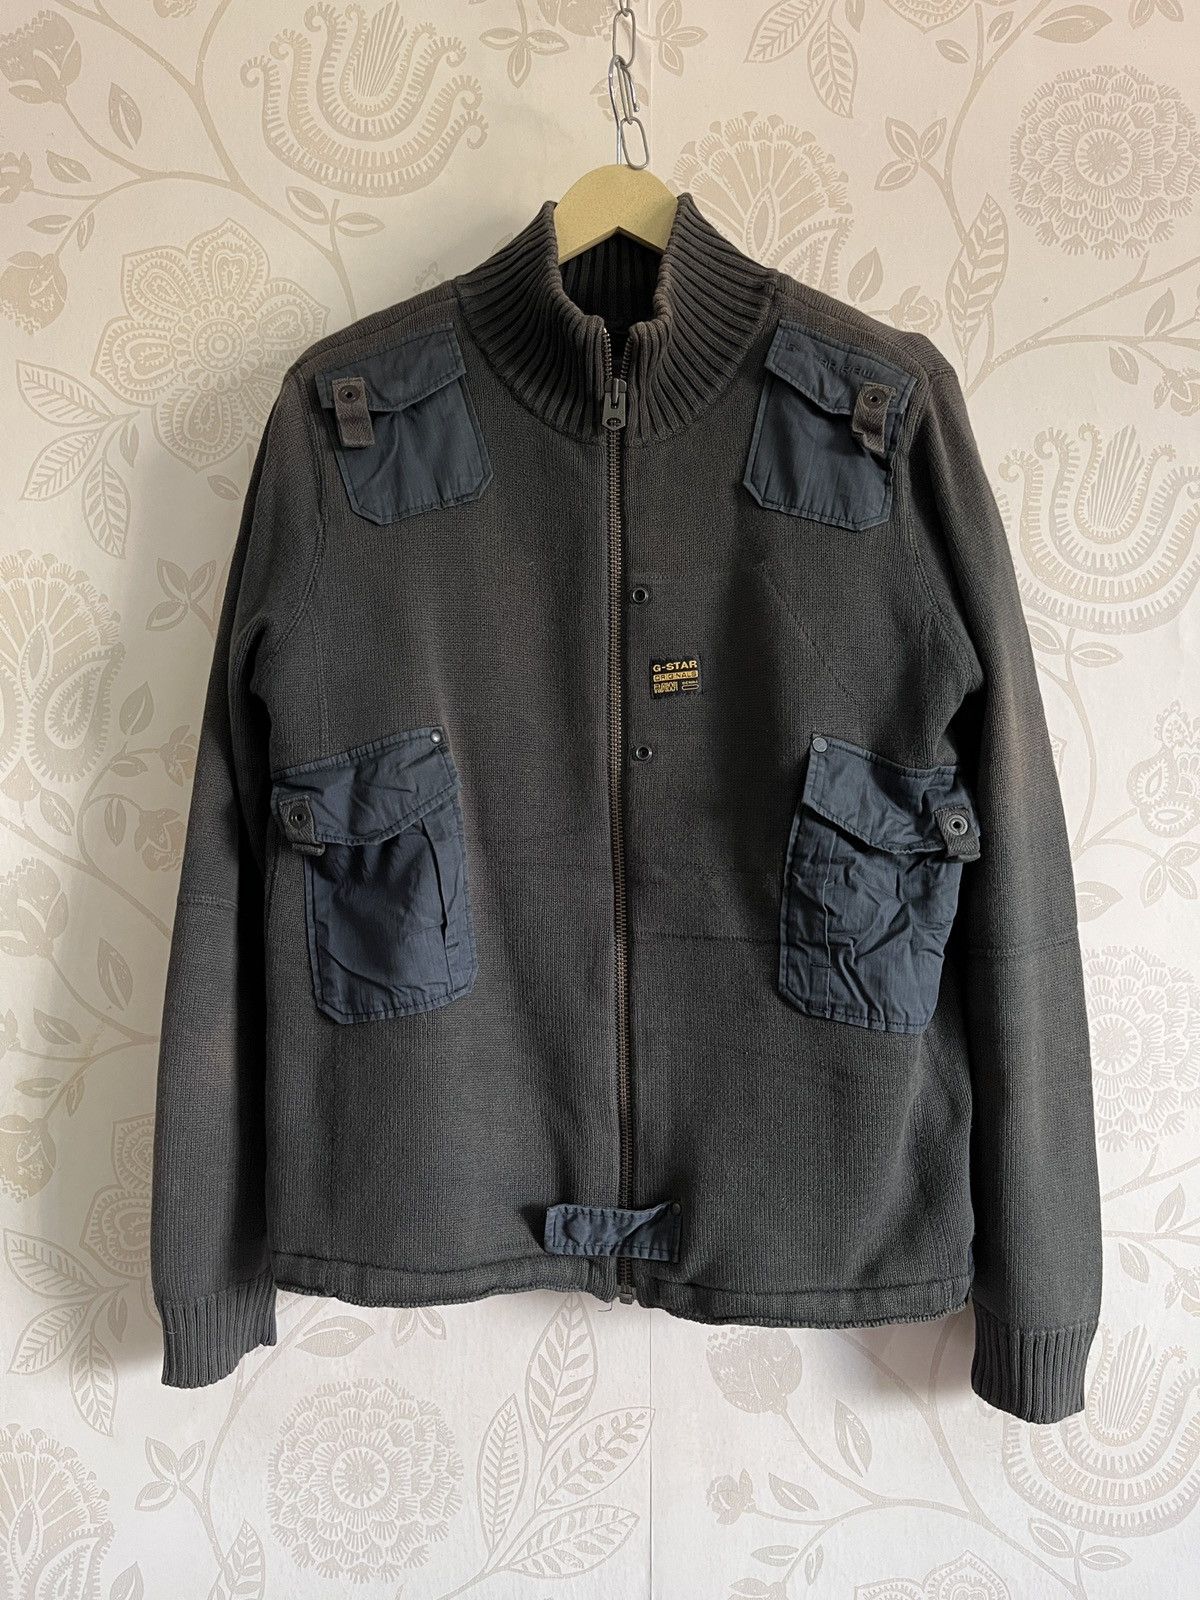 Vintage - Army Sweater G Star Raw Knitwear Wool Tactical Jacket - 1